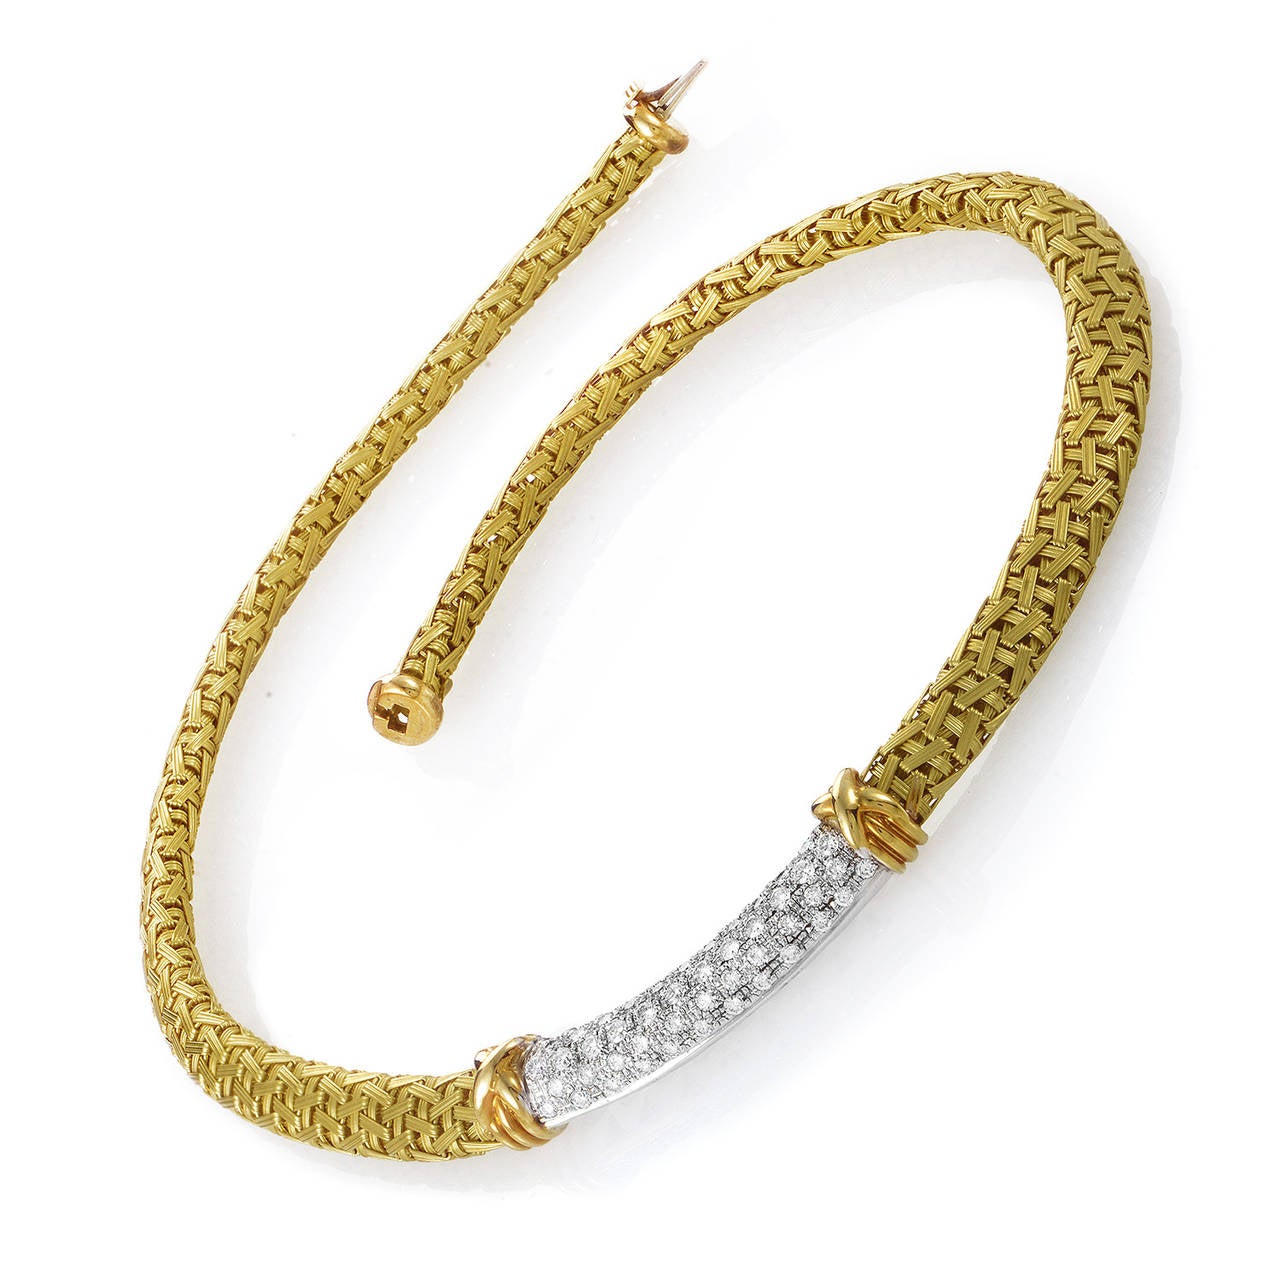 This tastefully designed necklace from Roberto Coin is an absolute delight to wear as well as to behold. The necklace is made primarily of 18K yellow gold and boasts other golden accents. a white gold accent set with a pave of white diamonds as well